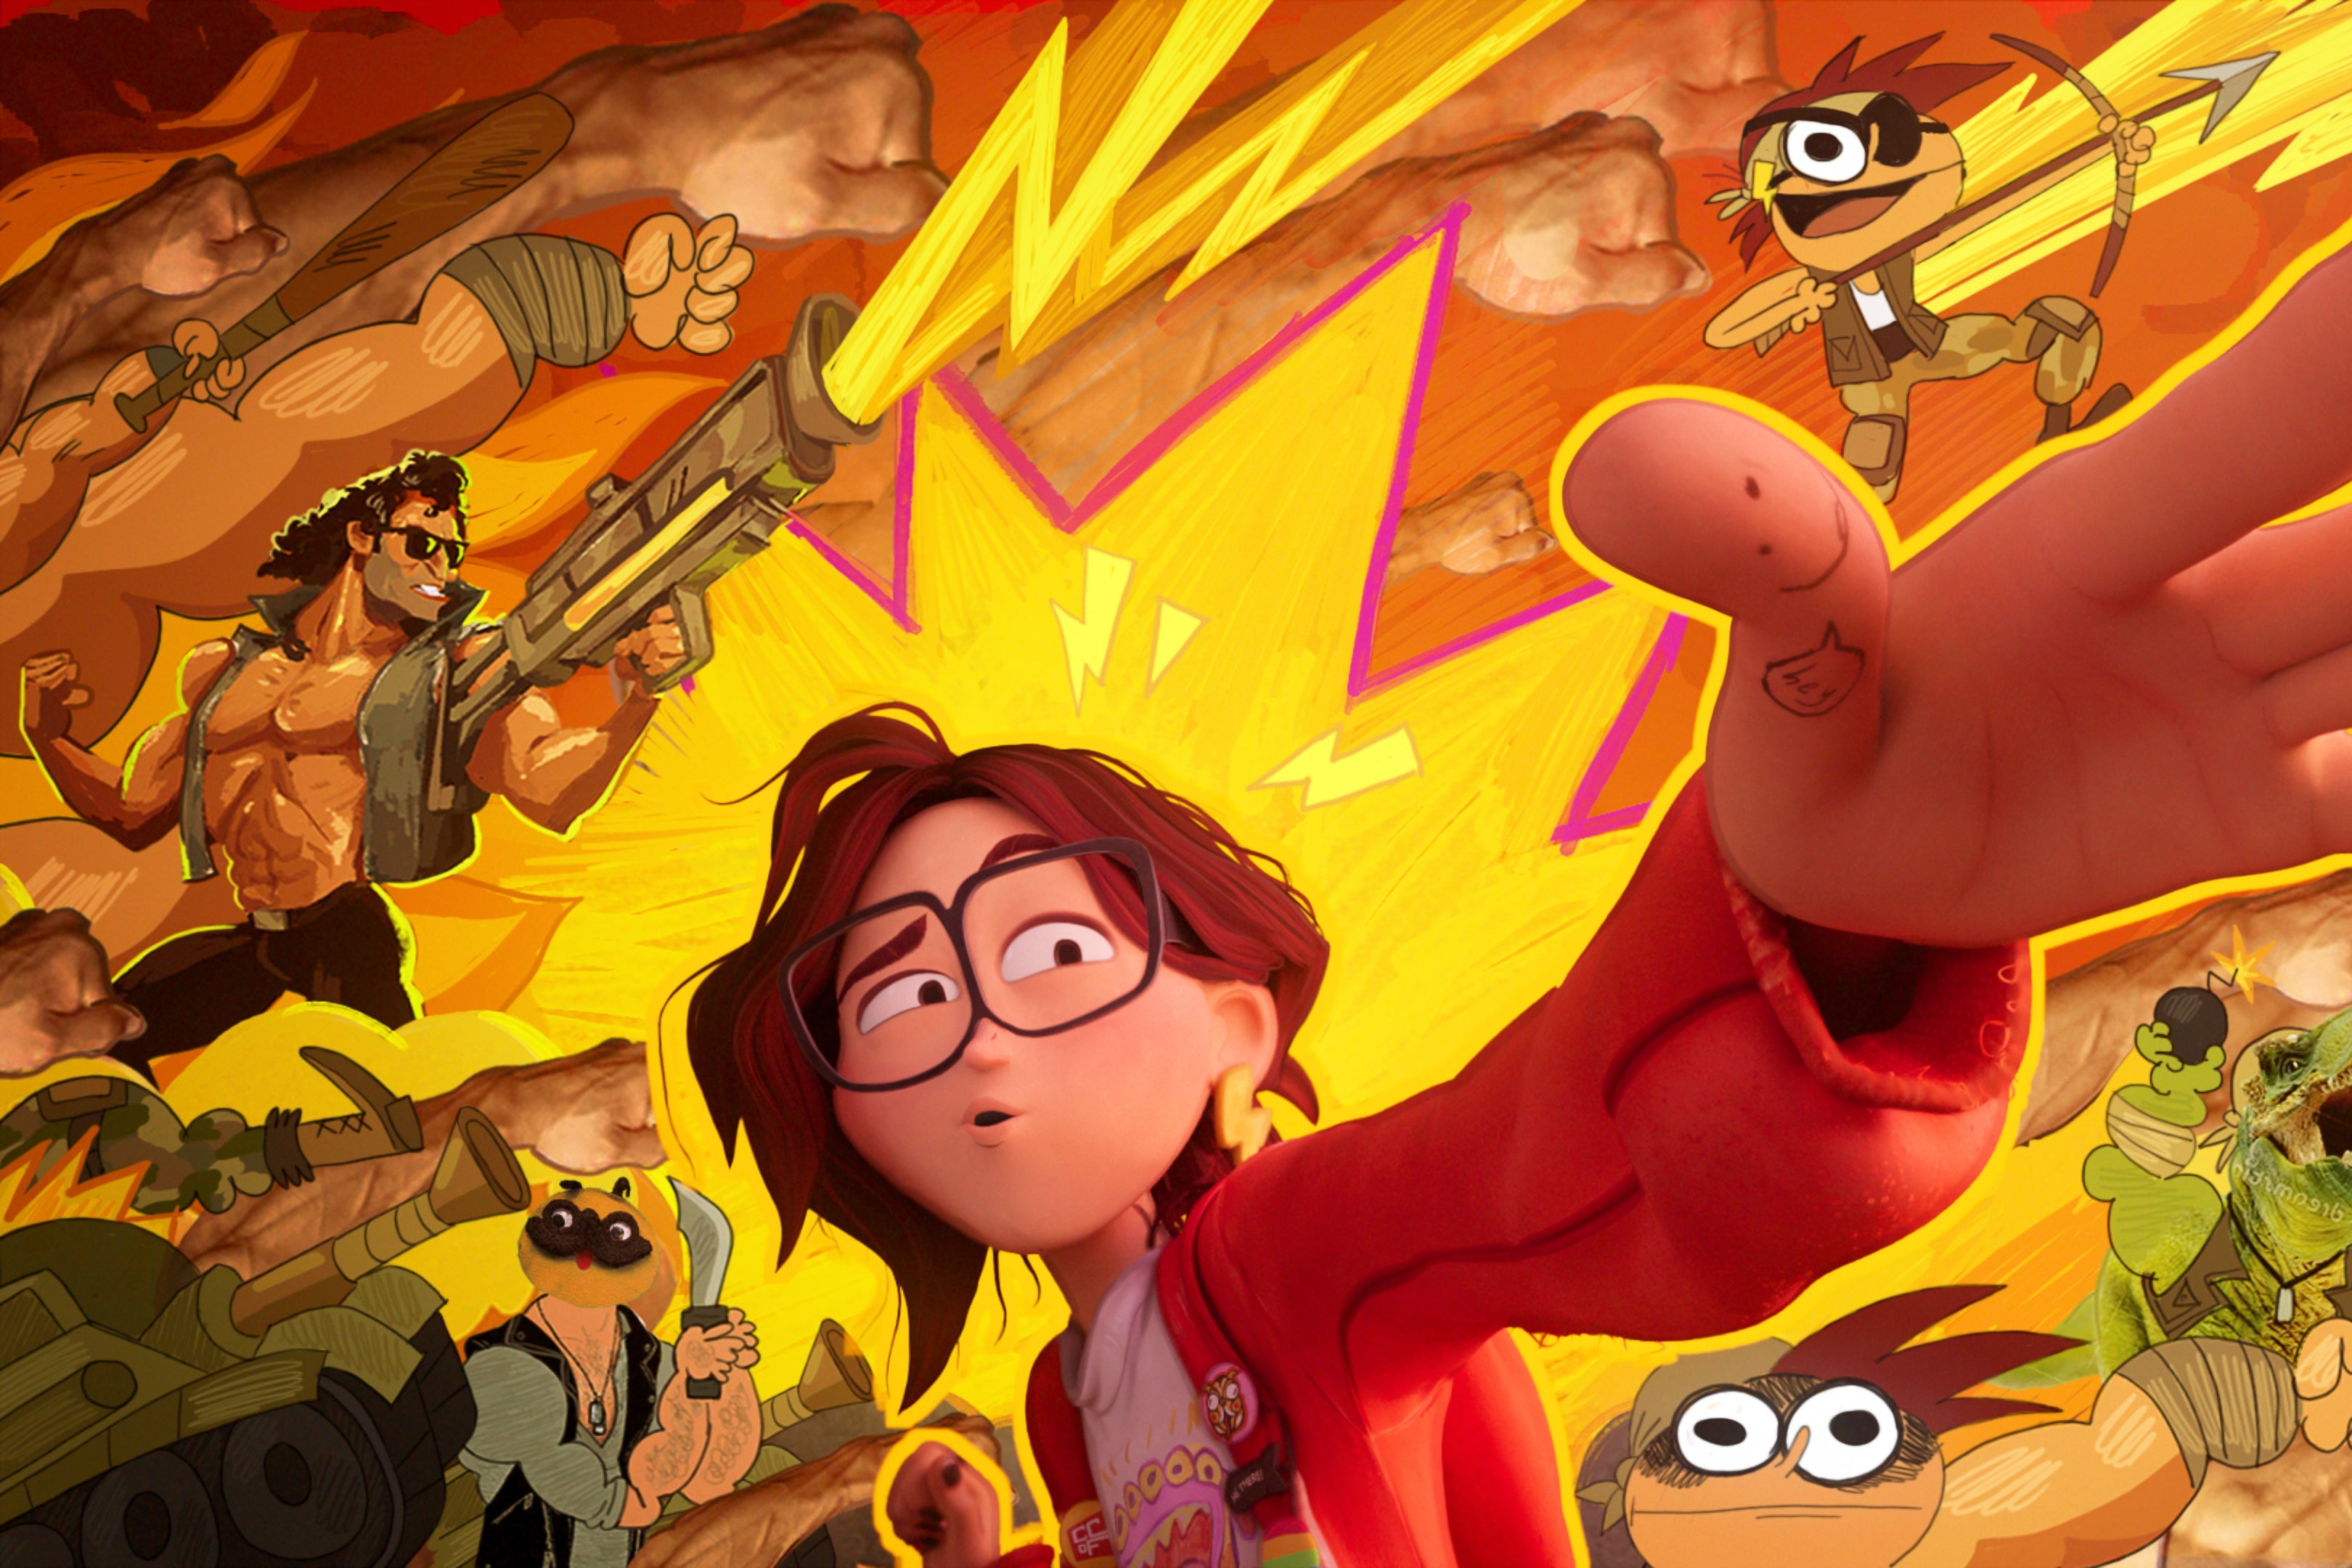 I CG character dressed like an artsy young girl is surrounded by drawings of a pug with a knife and a T-rex with bombs. She extends one hand as if to say "Far out."